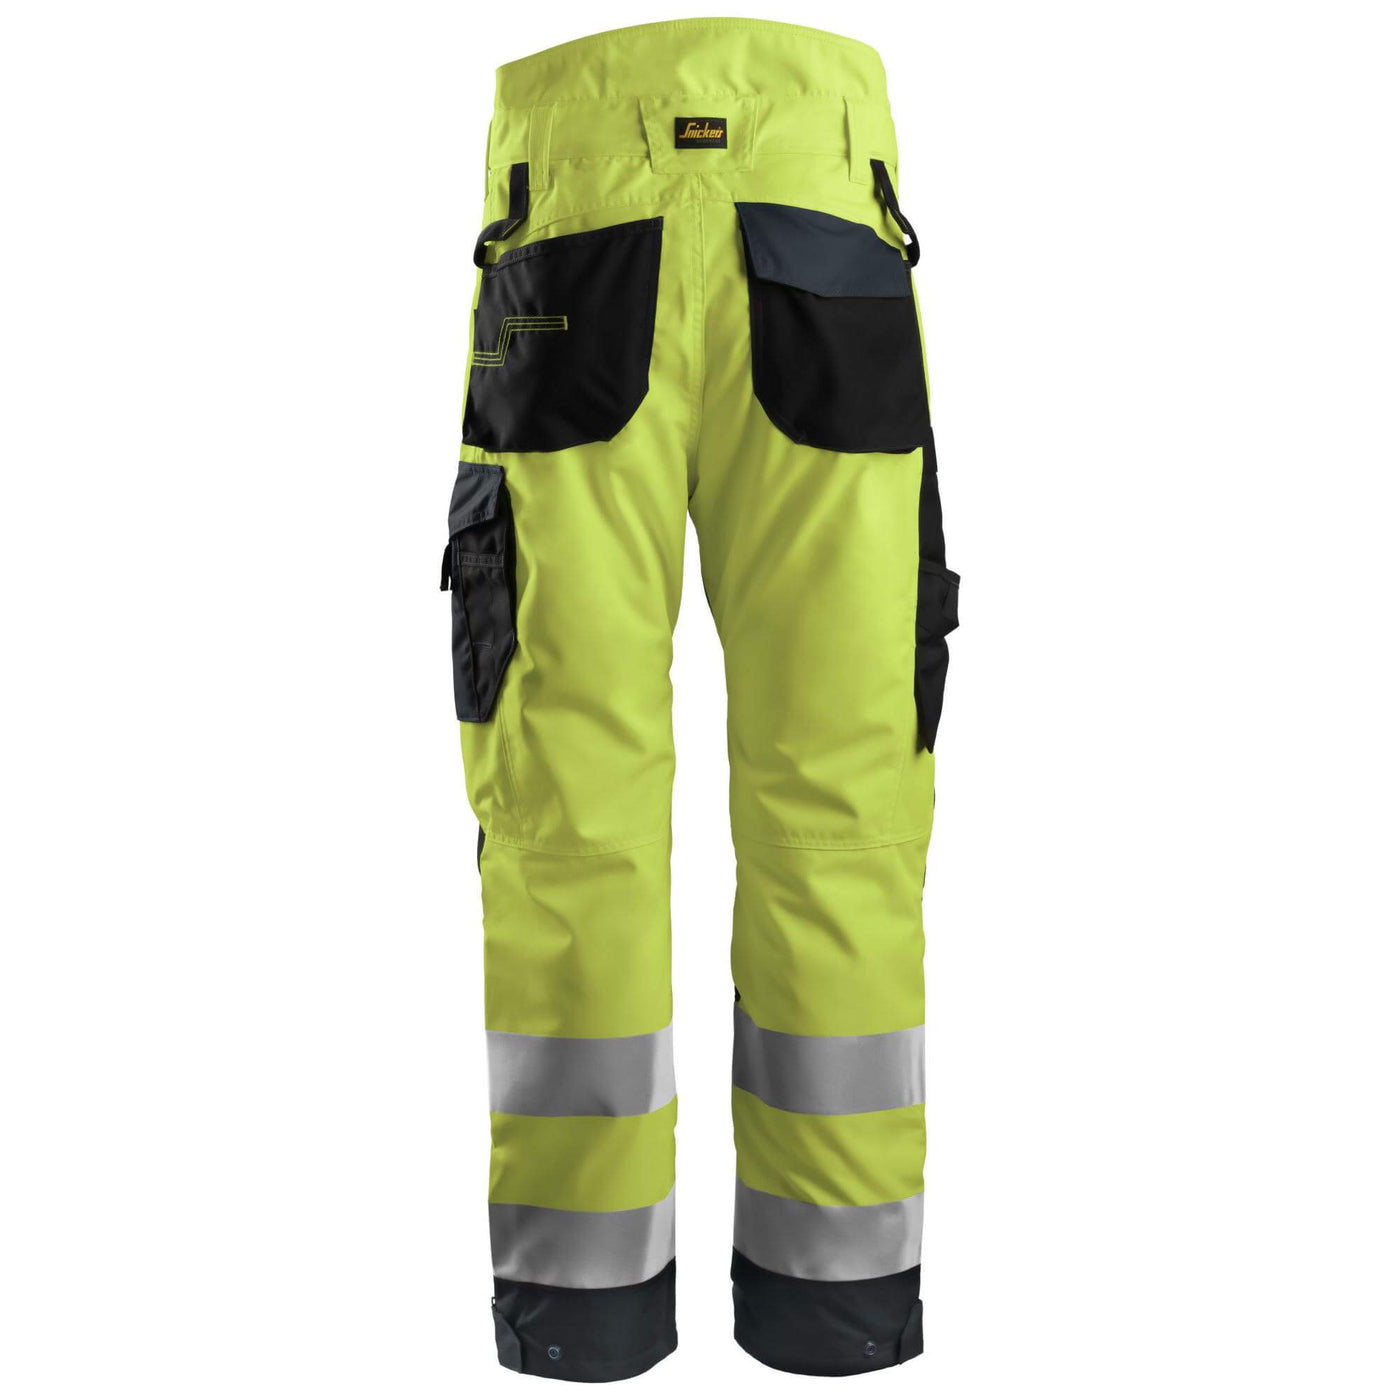 Snickers 6639 Hi Vis 37.5 Insulated Winter Trousers Class 2 Hi Vis Yellow Steel Grey back #colour_hi-vis-yellow-steel-grey